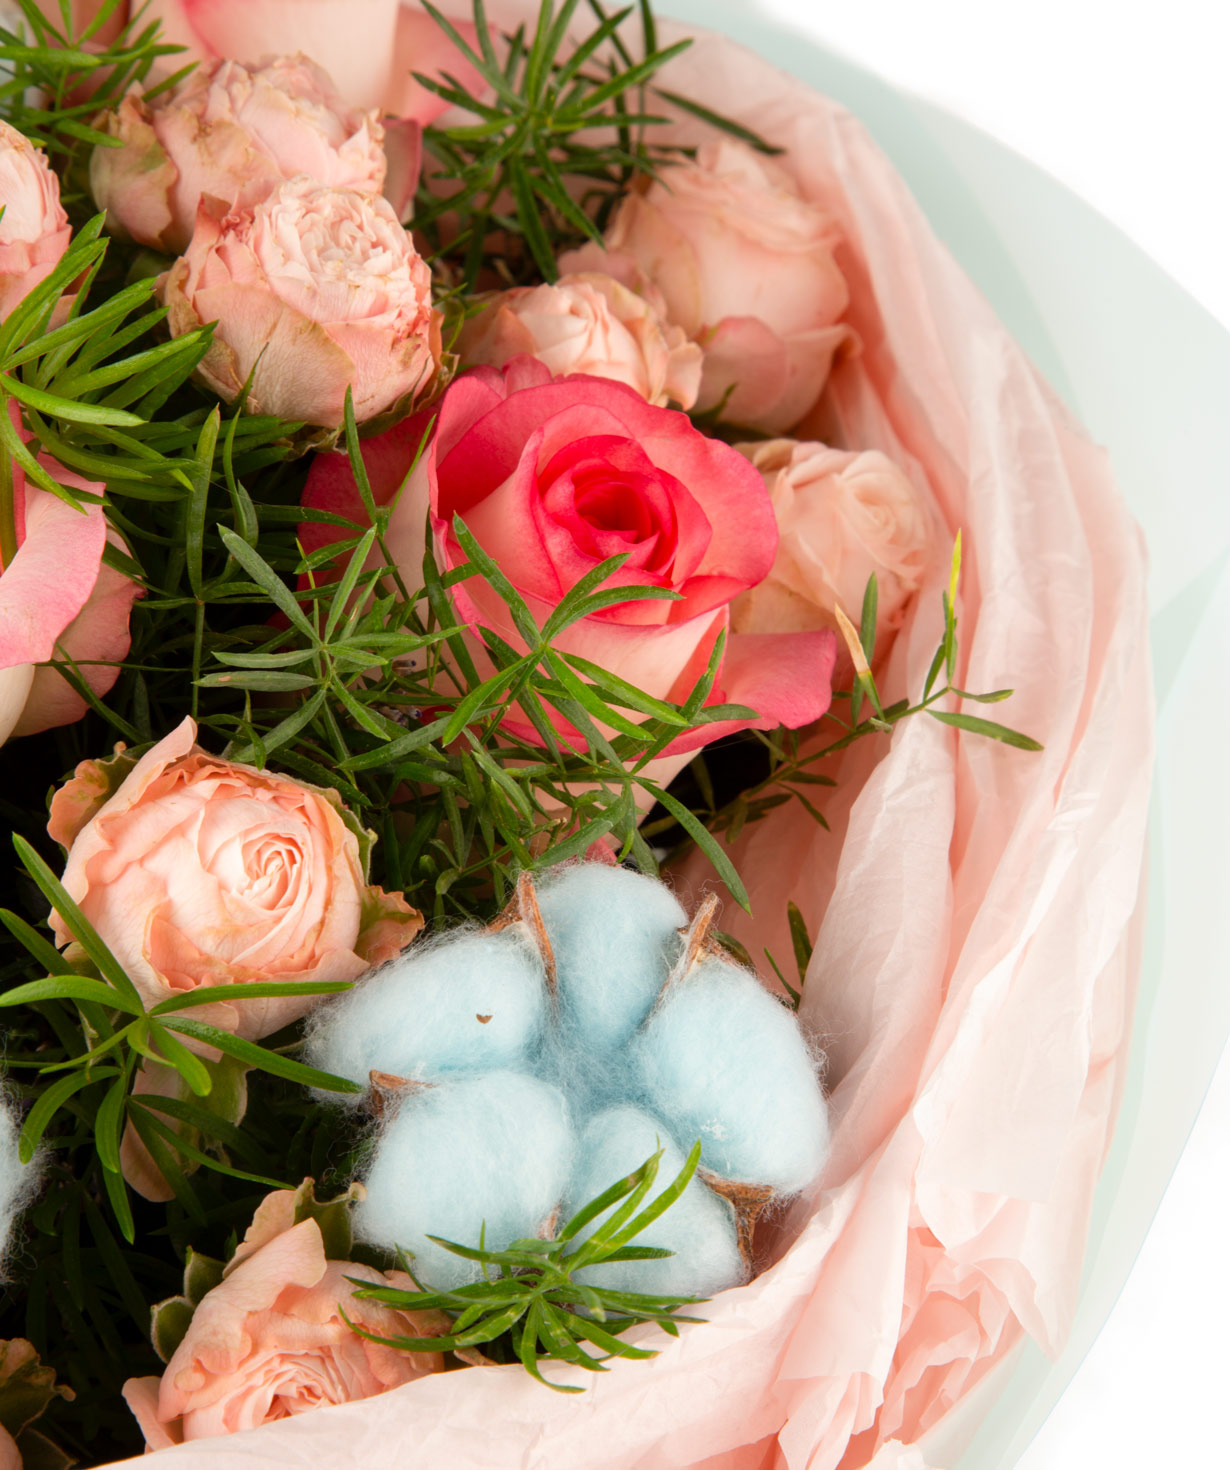 Bouquet `Anjar` with roses and cotton